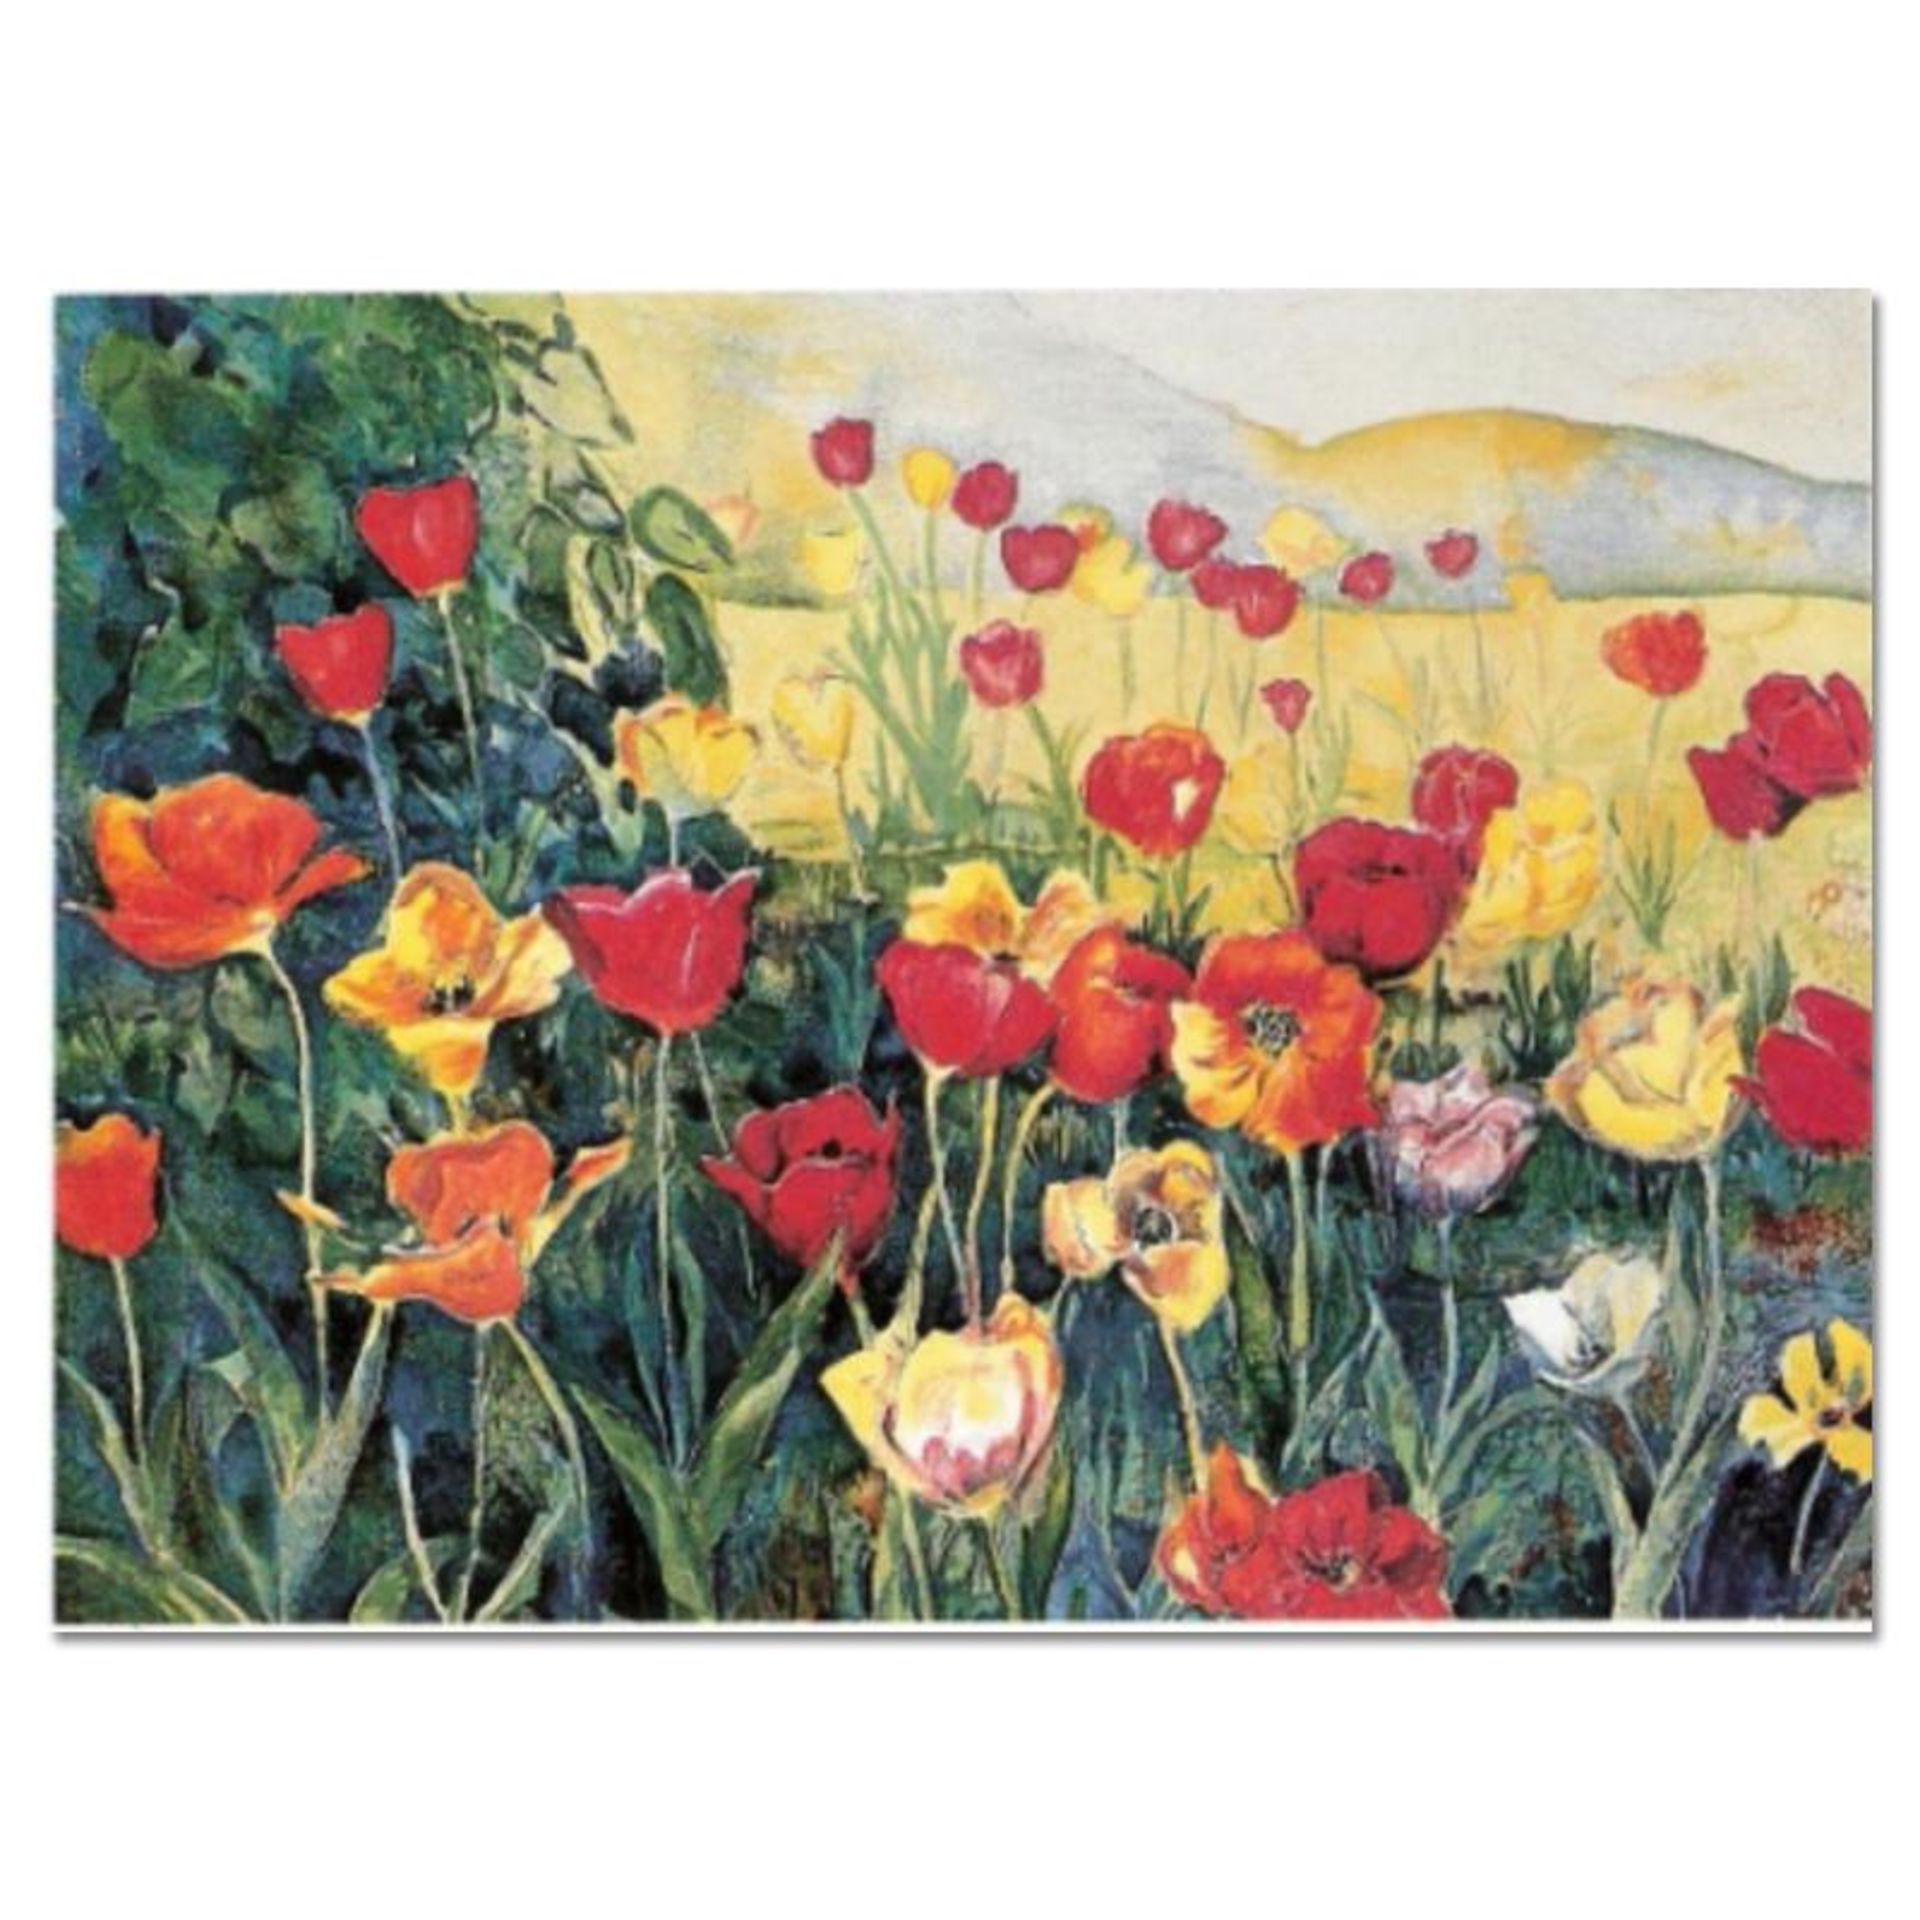 Perla Fox, "Tulips" Hand Signed Limited Edition Serigraph with Letter of Authent